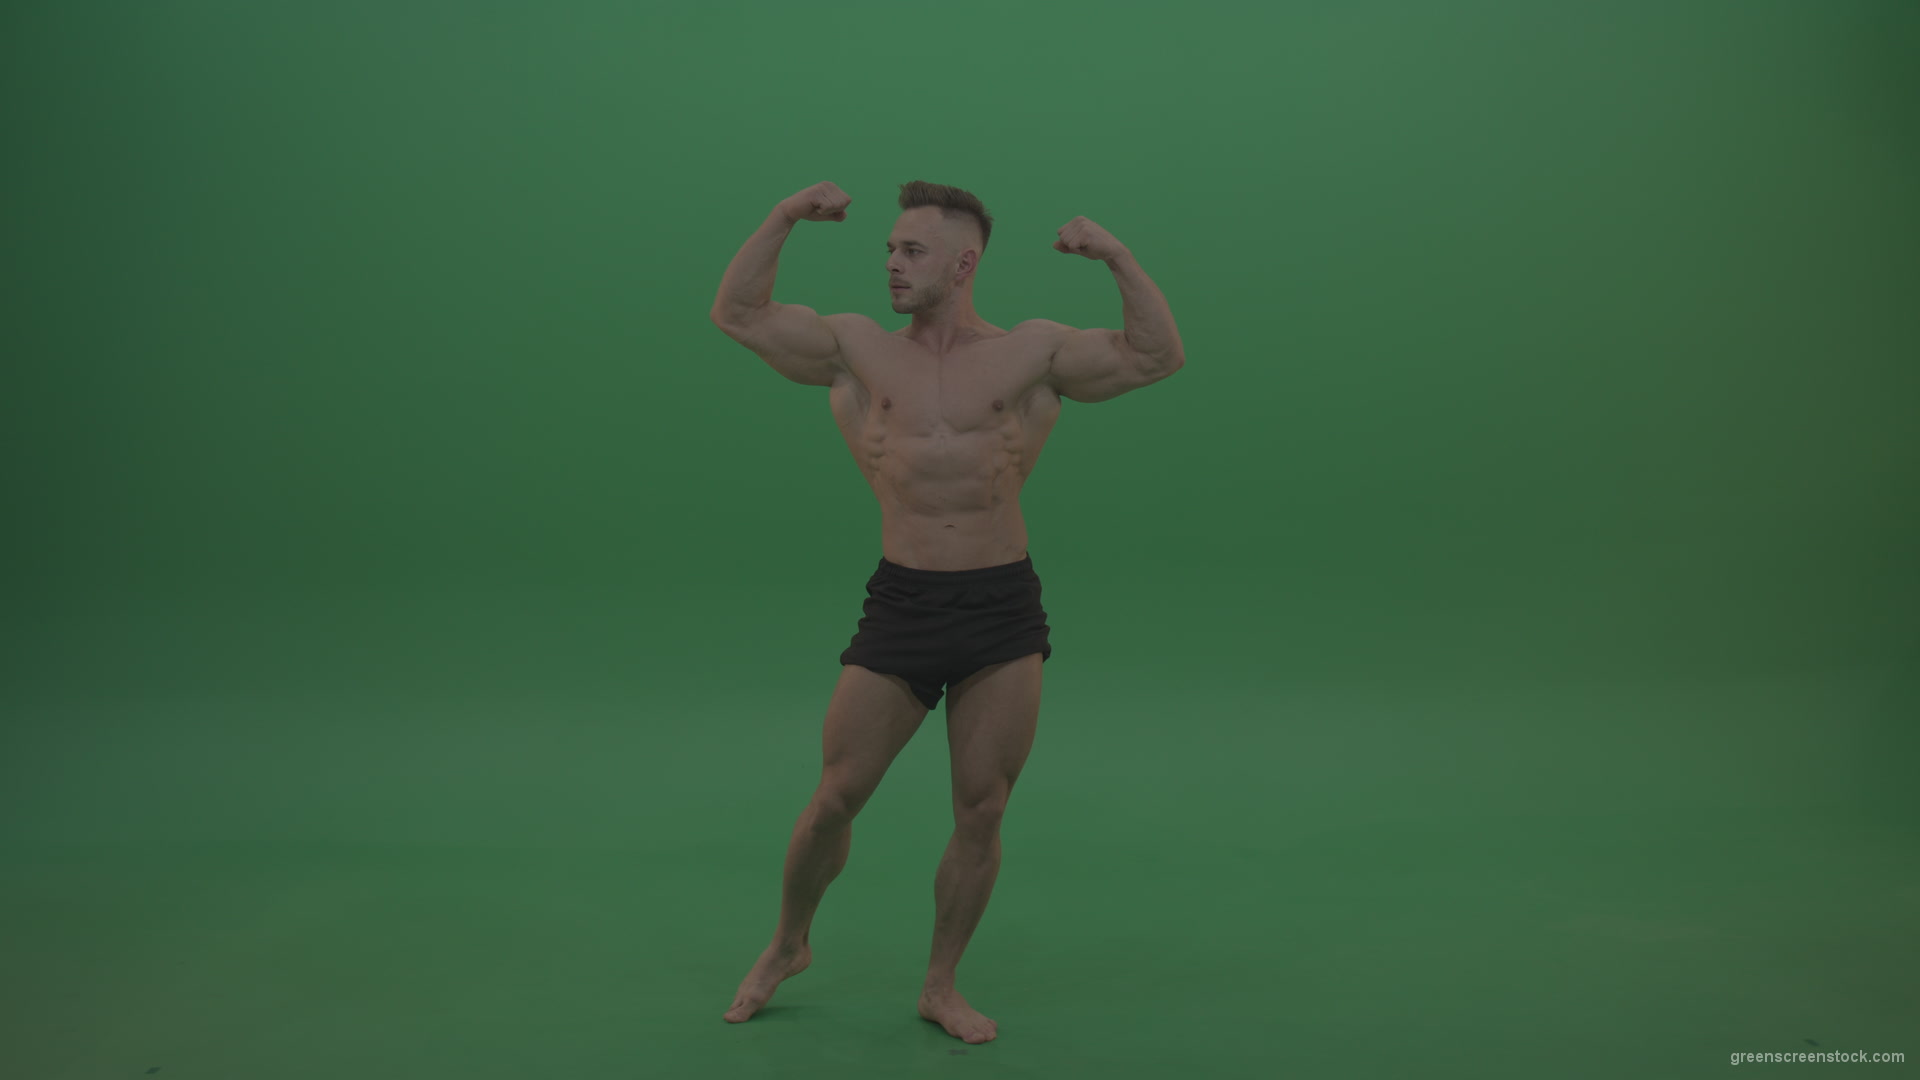 vj video background Young_Sportsman_Showing_Front_Double_Biceps_And_Thigh_Muscles_Bodybuilding_Positions_On_Gren_Screen_Wall_Background_003